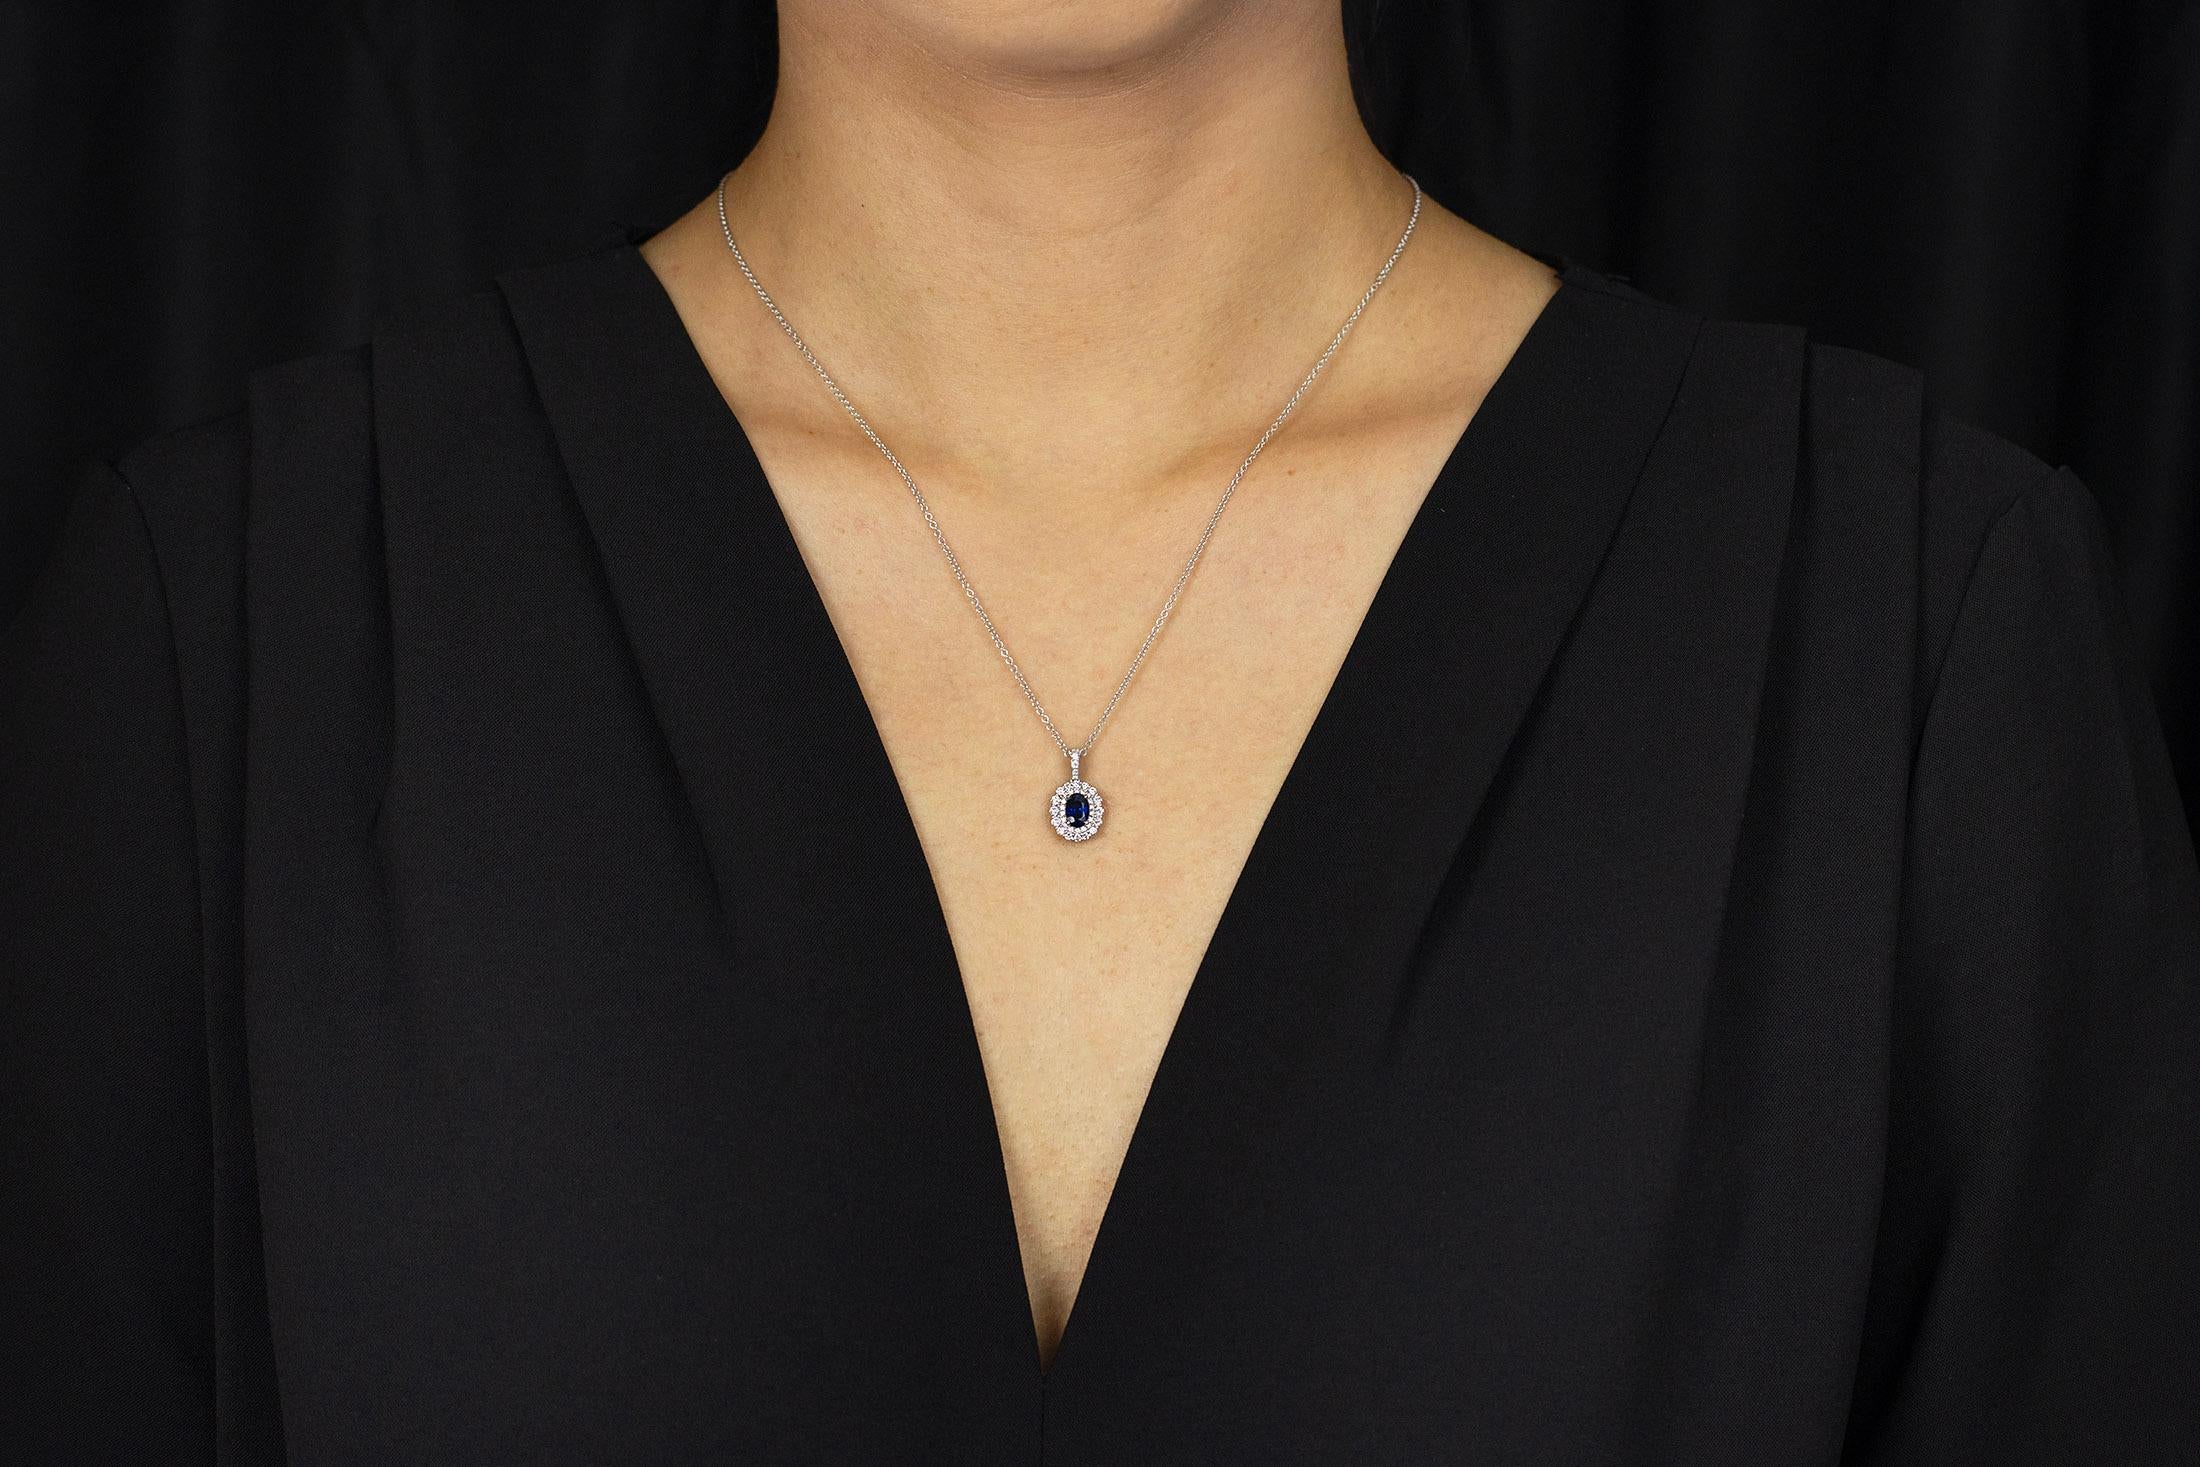 A simple pendant necklace showcasing a 0.52 carat blue sapphire, complemented by a round brilliant diamond surround. Diamonds weigh 0.37 carats total. Attached to a 18 inch white gold chain, Made in 18k White Gold. 

Style available in different